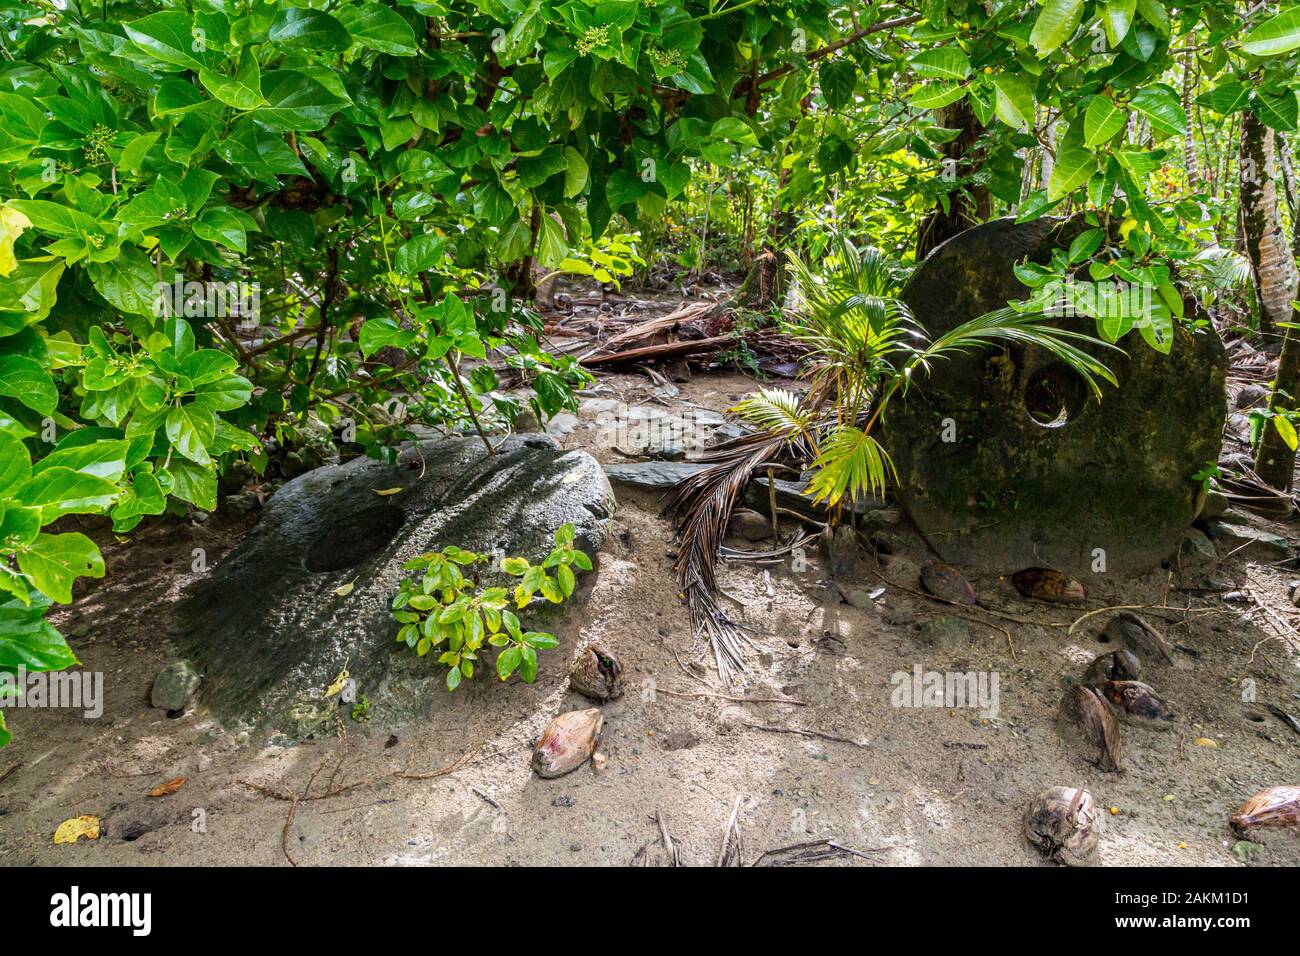 Two giant prehistoric megalithic stone coins or money rai, lying in the sand hidden under trees overgrown in jungle. Yap island, Federated States of M Stock Photo